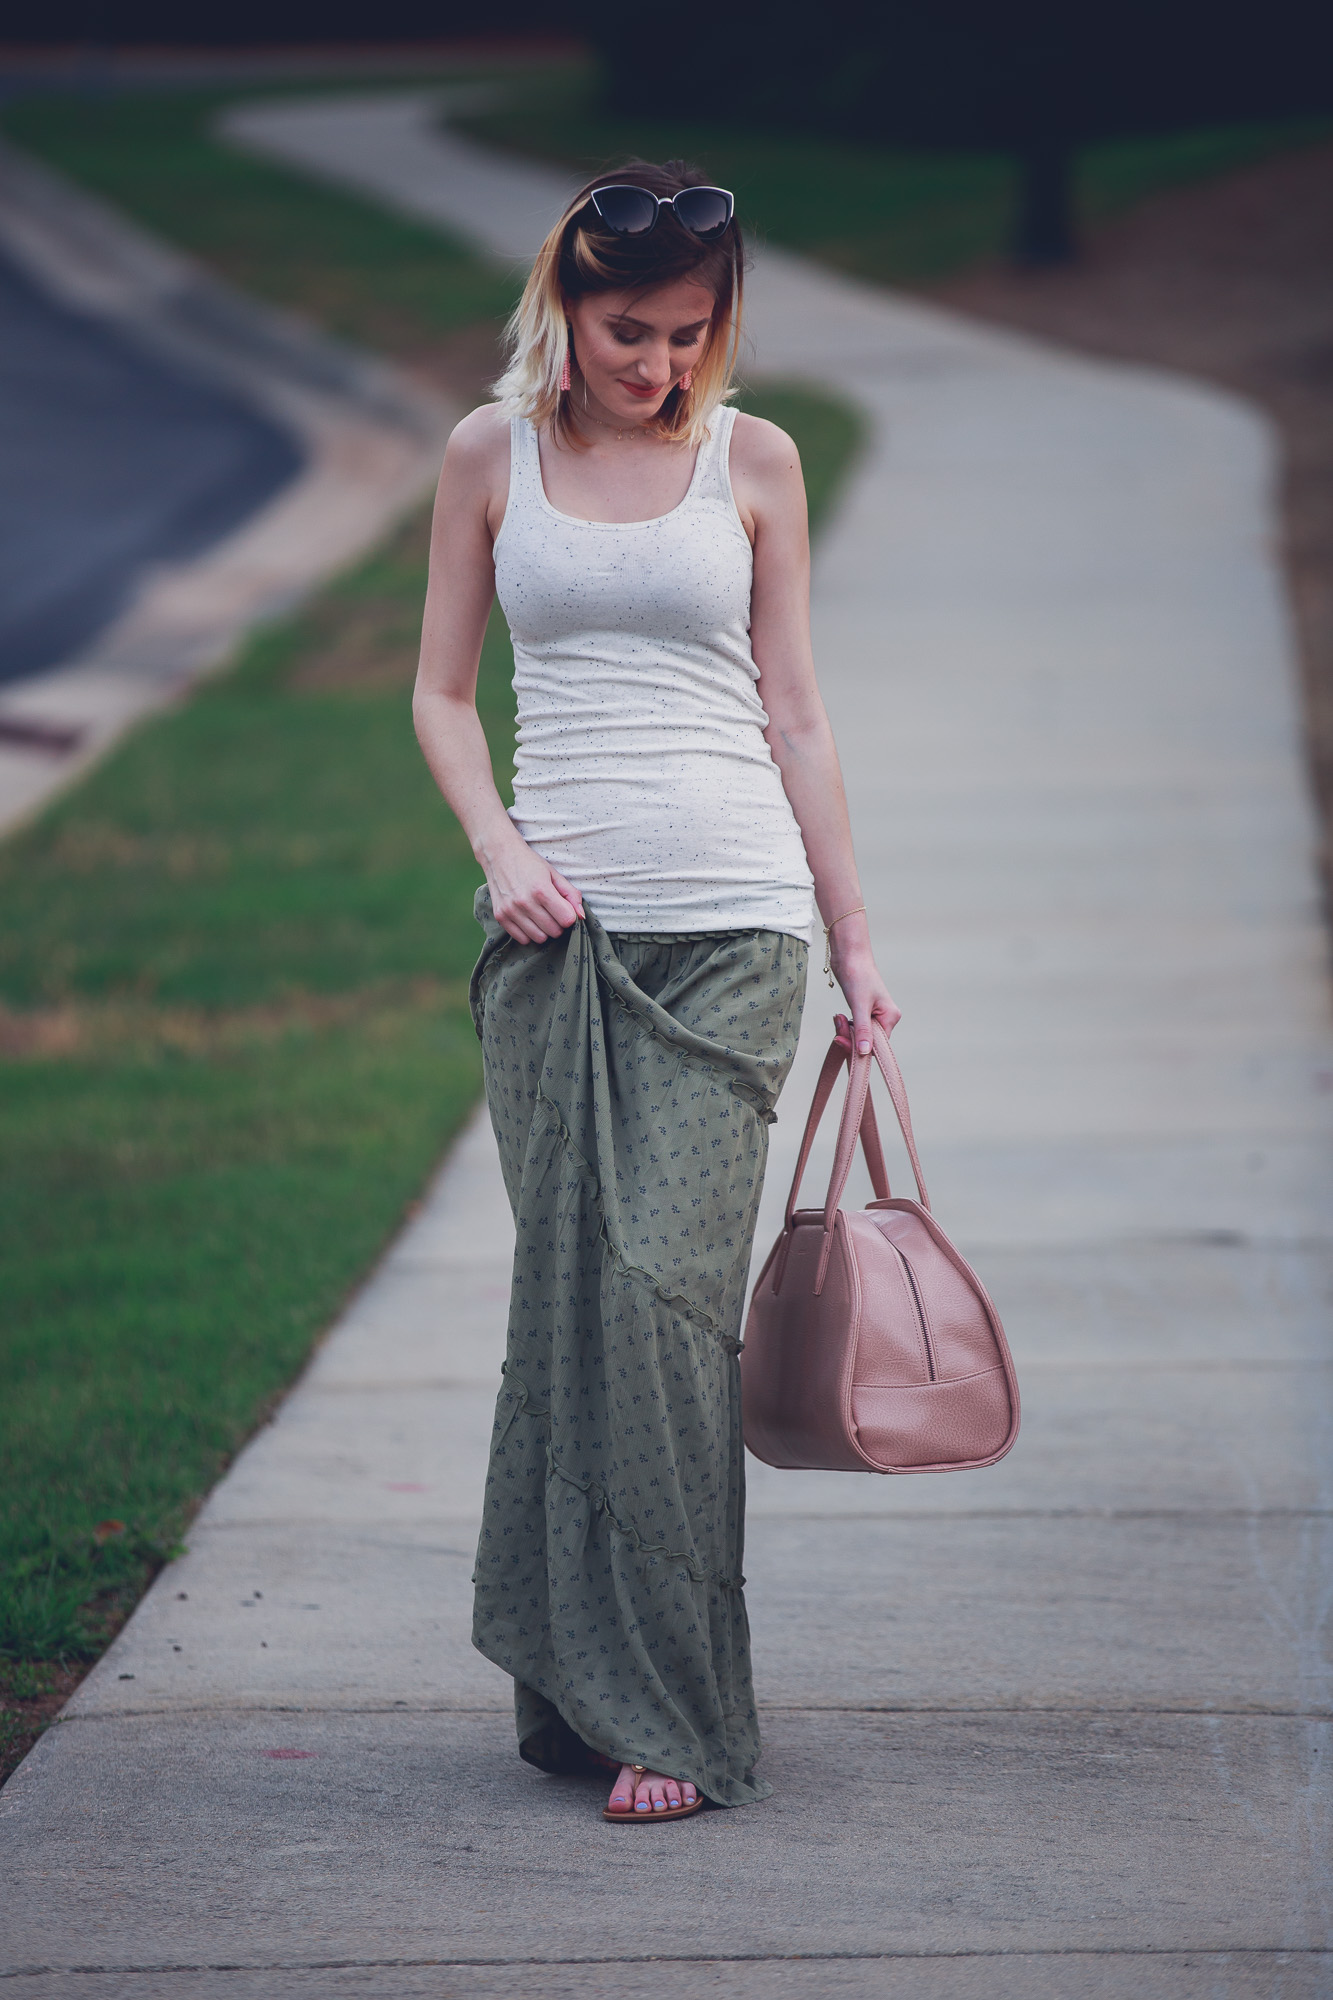 Jessica Linn from the lifestyle and fashion blog Linn Style wearing a green maxi skirt from Target, and tan tank top from Target, Baublebar earrings, a Kendra Scott bracelet, Charming Charlie sunglasses and carrying a Matt and Nat purse. 17 weeks pregnant maternity pregnancy clothes and style. Tory Burch sandals